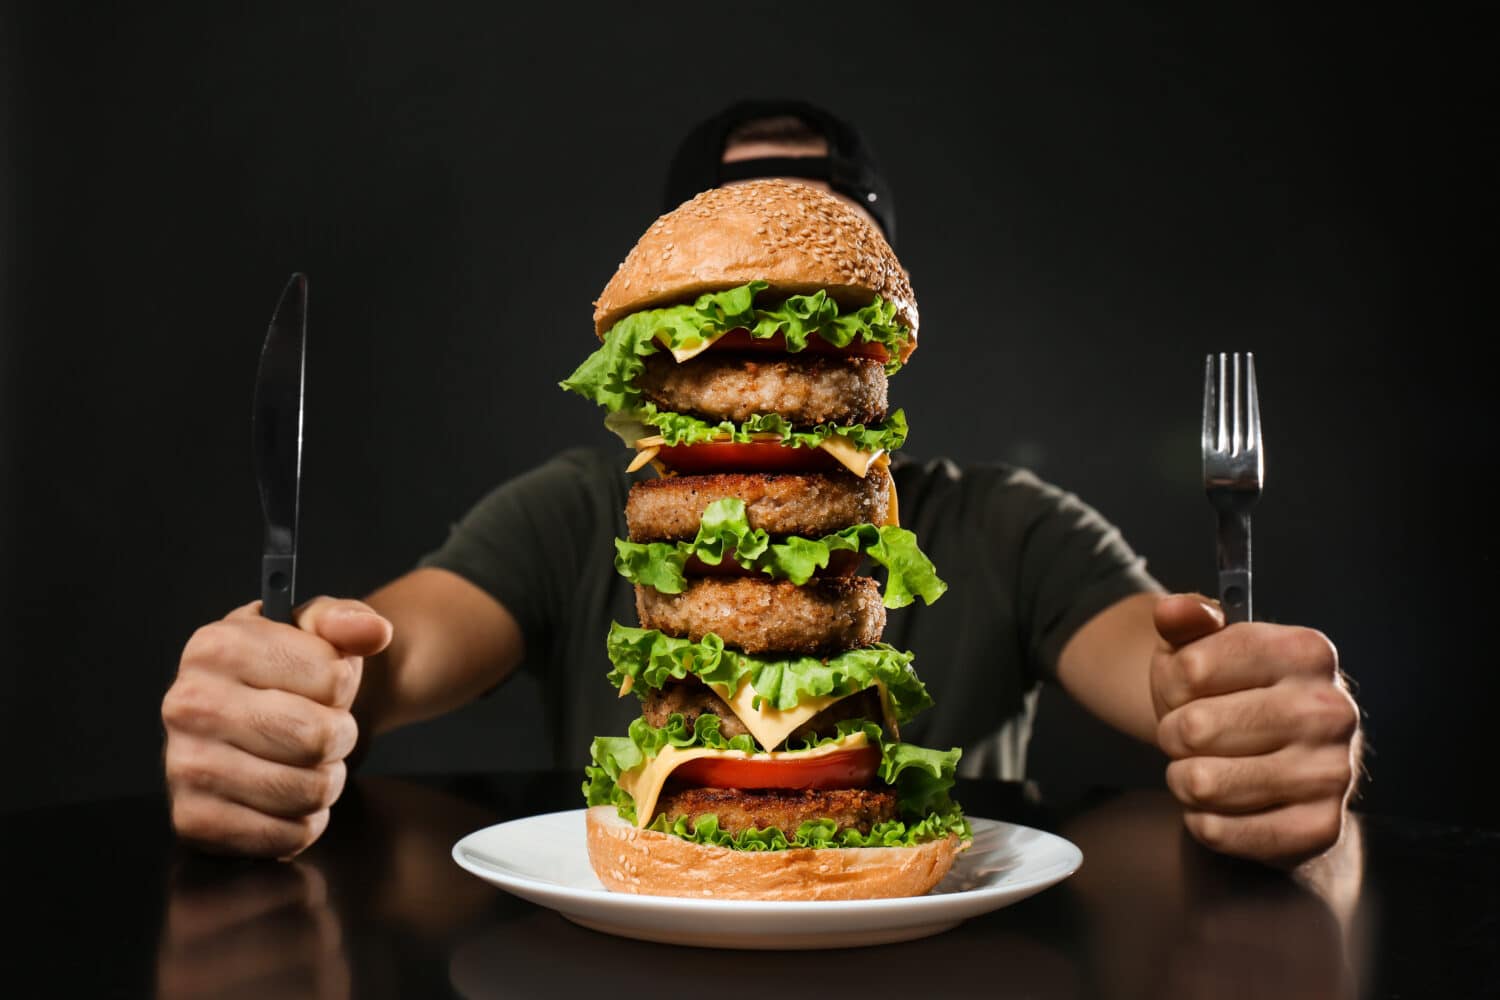 Man with cutlery eating huge burger on black background